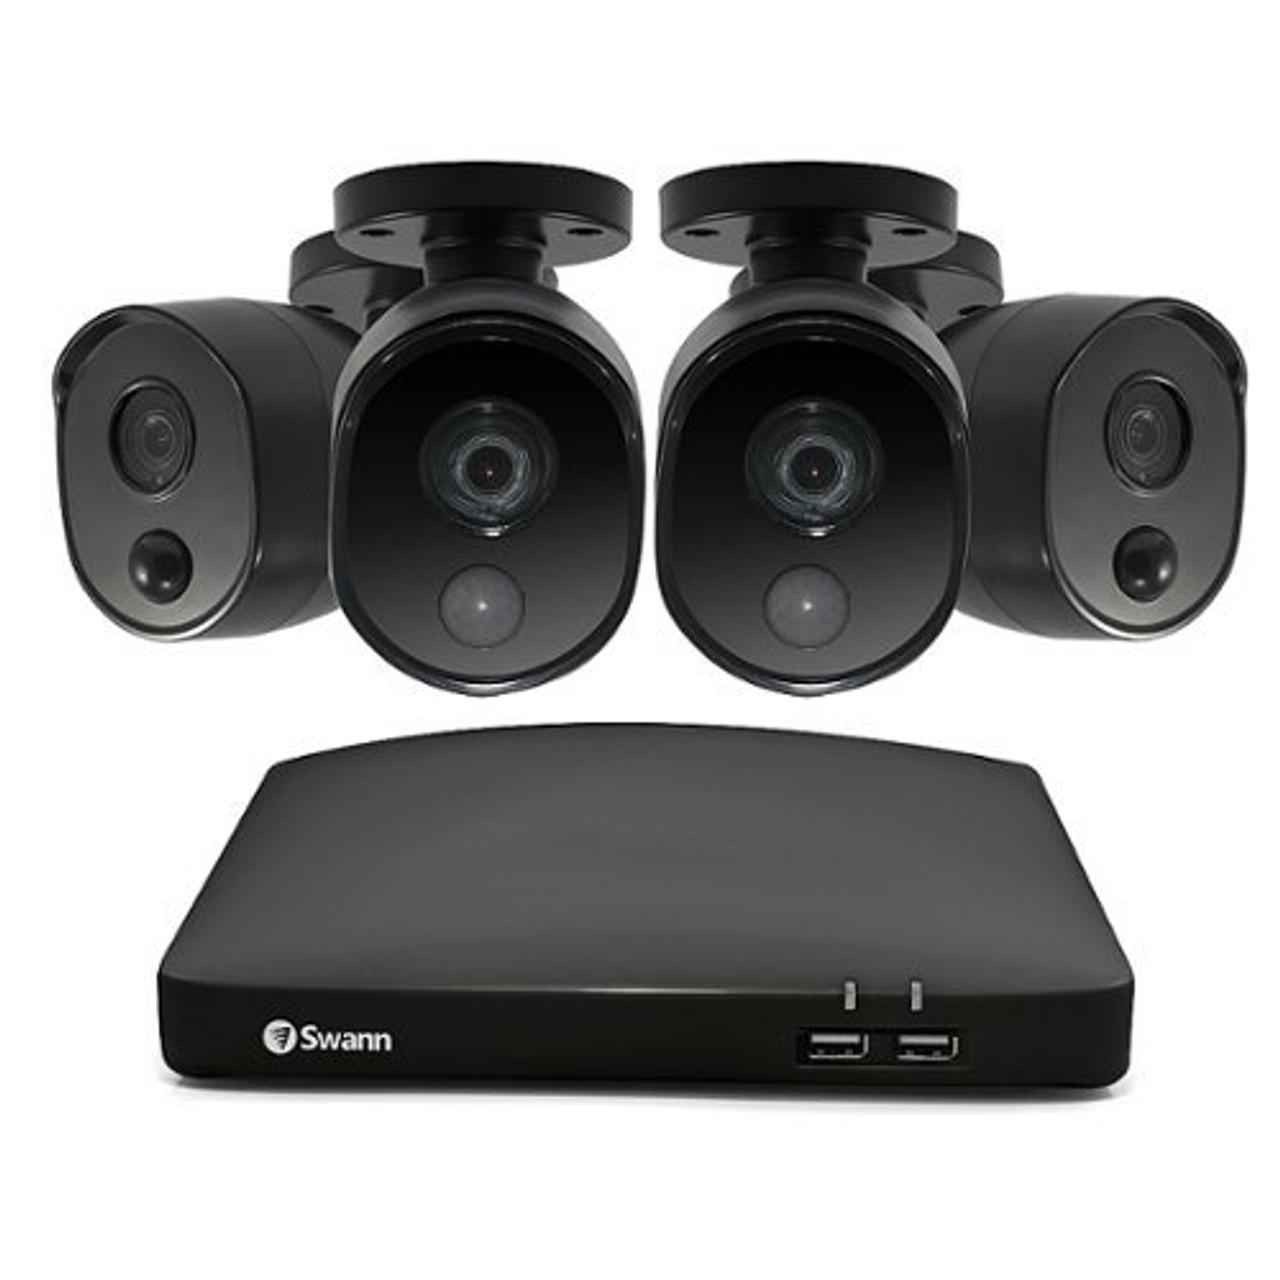 Swann - 4 Channel, 4 Bullet Camera,  Indoor/Outdoor, Wired 1080p Full HD DVR Security System with 64GB Micro SD Card